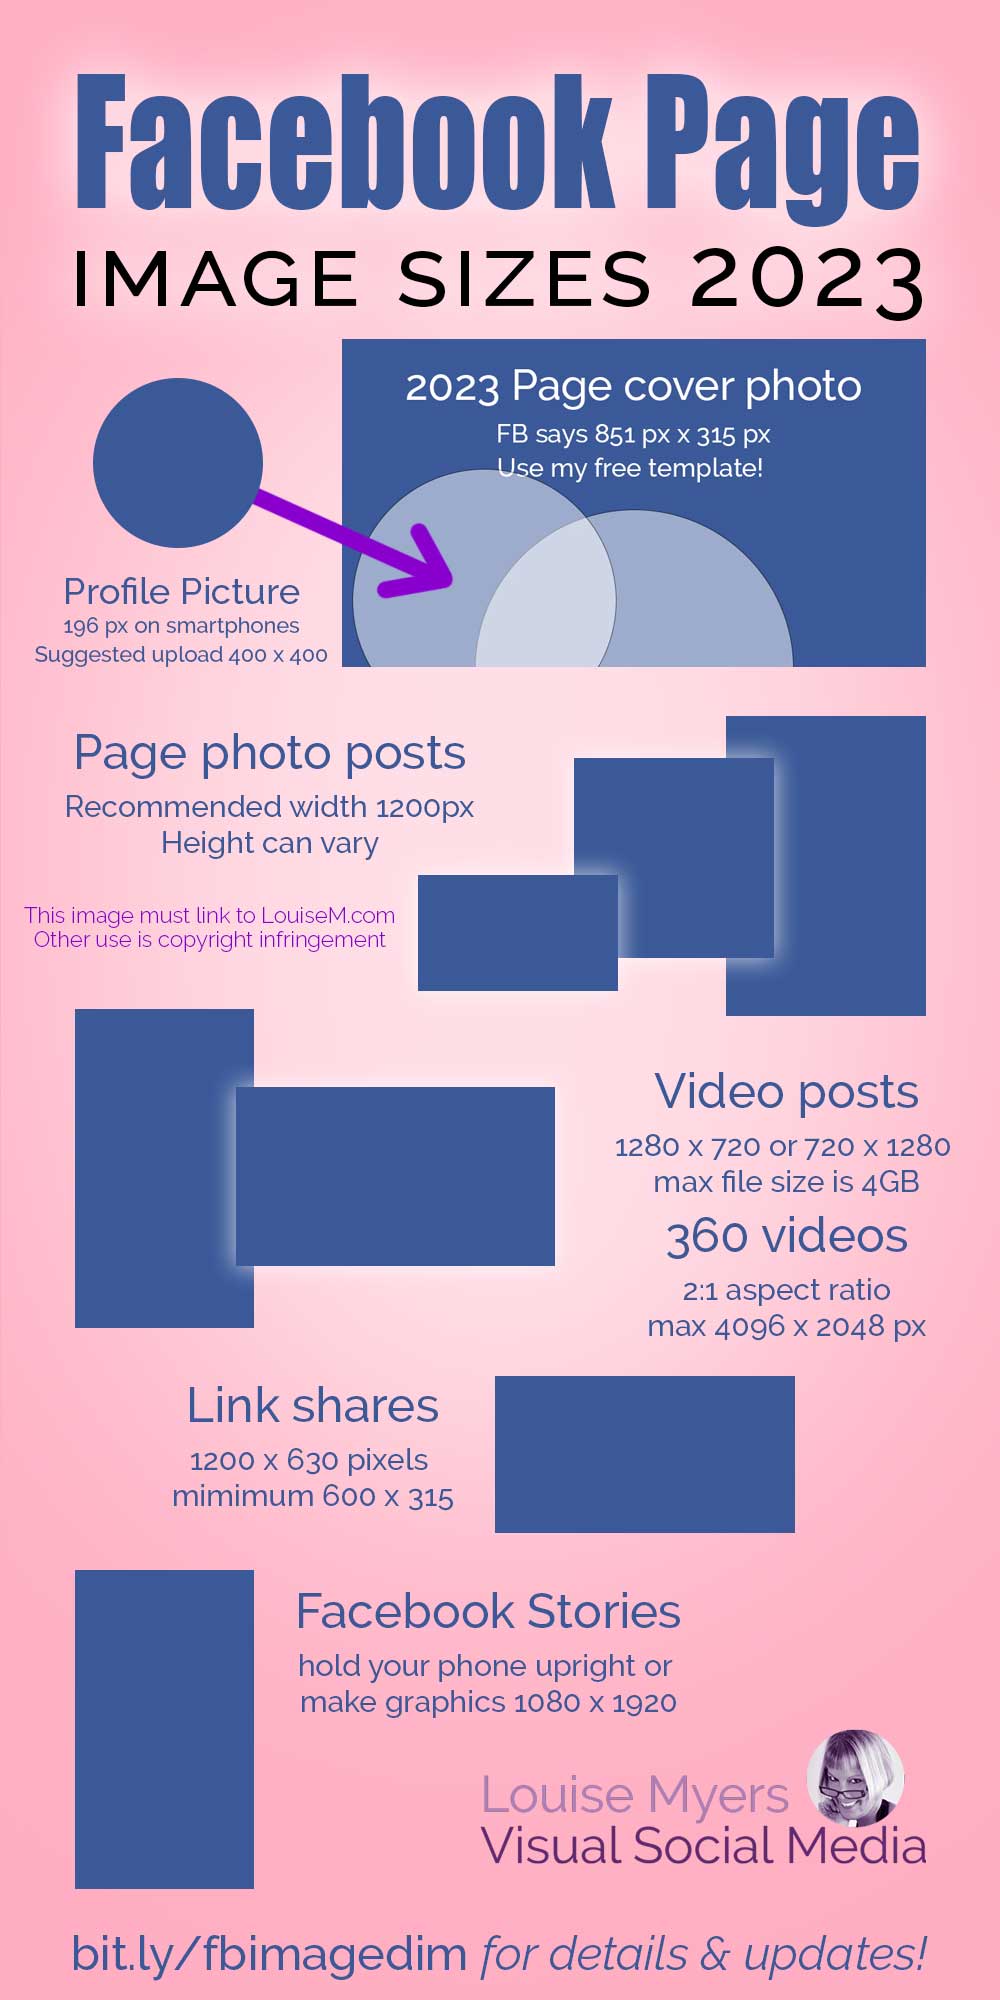 infographic showing top facebook image sizes for 2023.